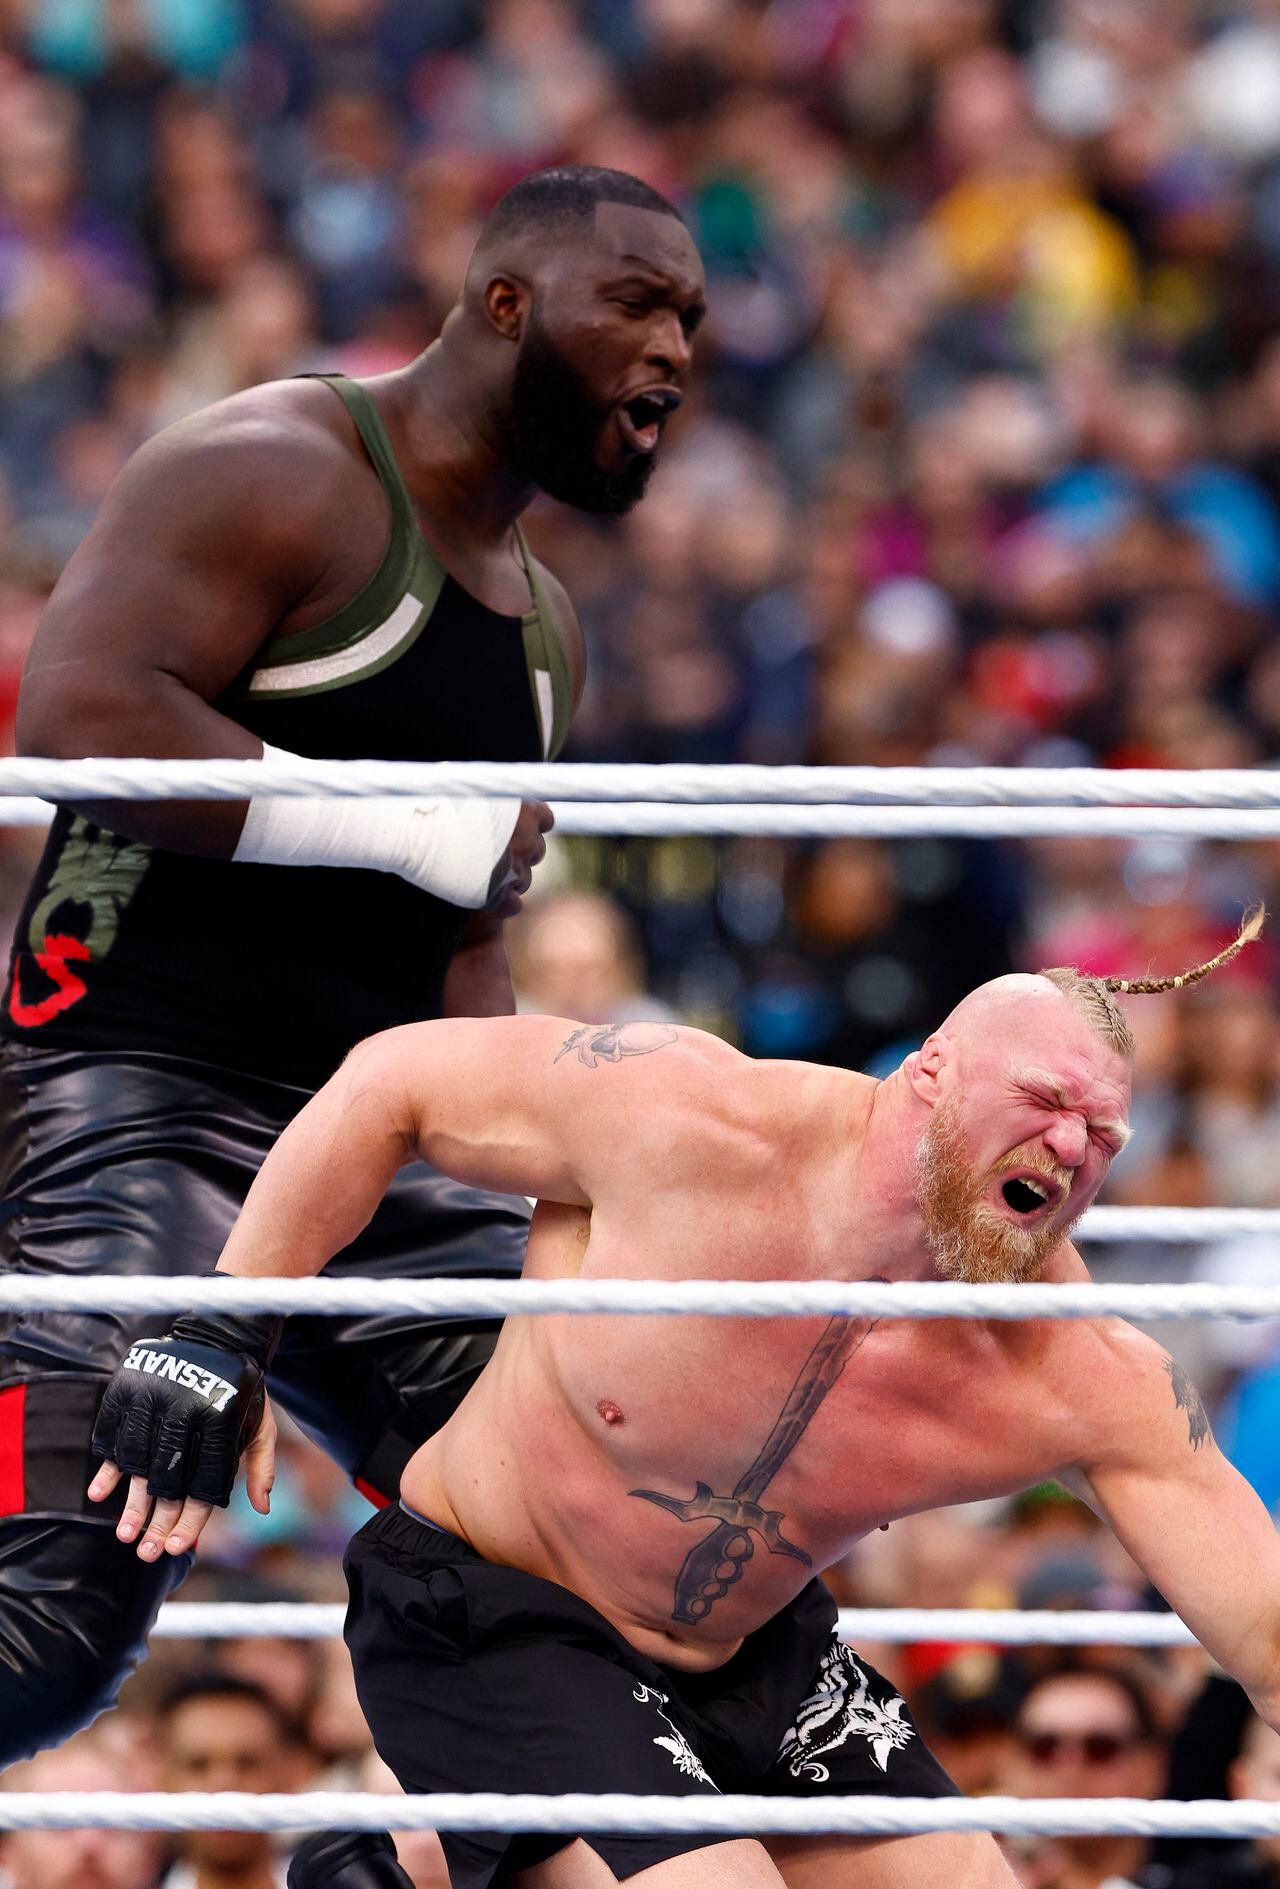 INGLEWOOD, CALIFORNIA - APRIL 02: ((L-R) Omos wrestles Brock Lesnar during WrestleMania Goes Hollywood at SoFi Stadium on April 02, 2023 in Inglewood, California.   Ronald Martinez/Getty Images/AFP (Photo by RONALD MARTINEZ / GETTY IMAGES NORTH AMERICA / Getty Images via AFP)